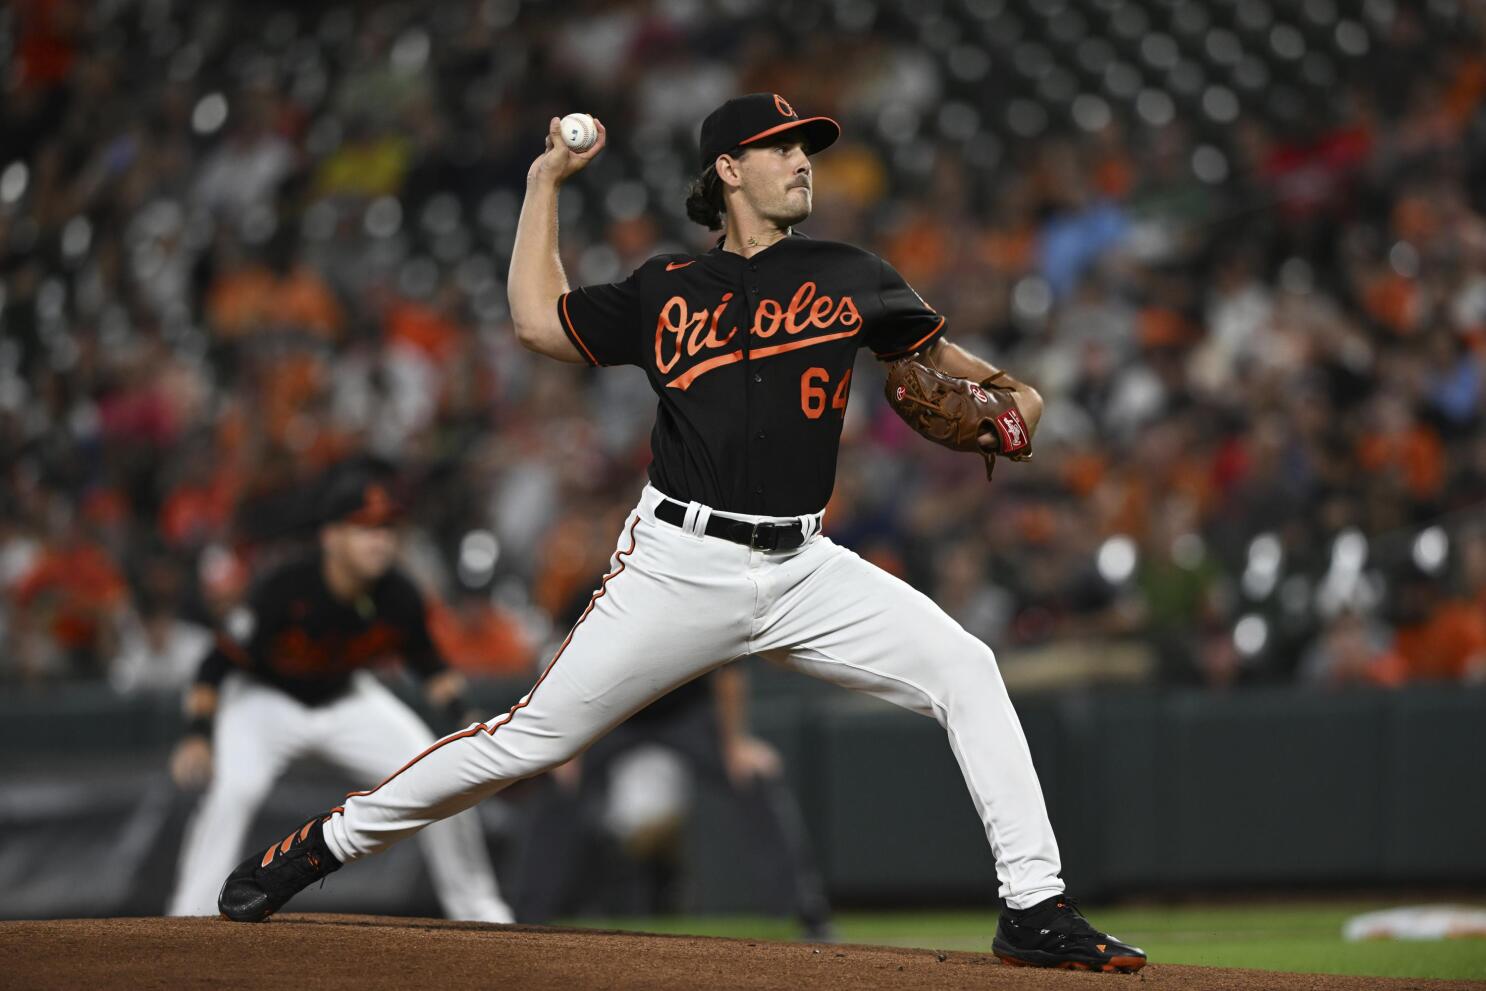 The pitching is becoming a problem for Orioles and Elias knows it